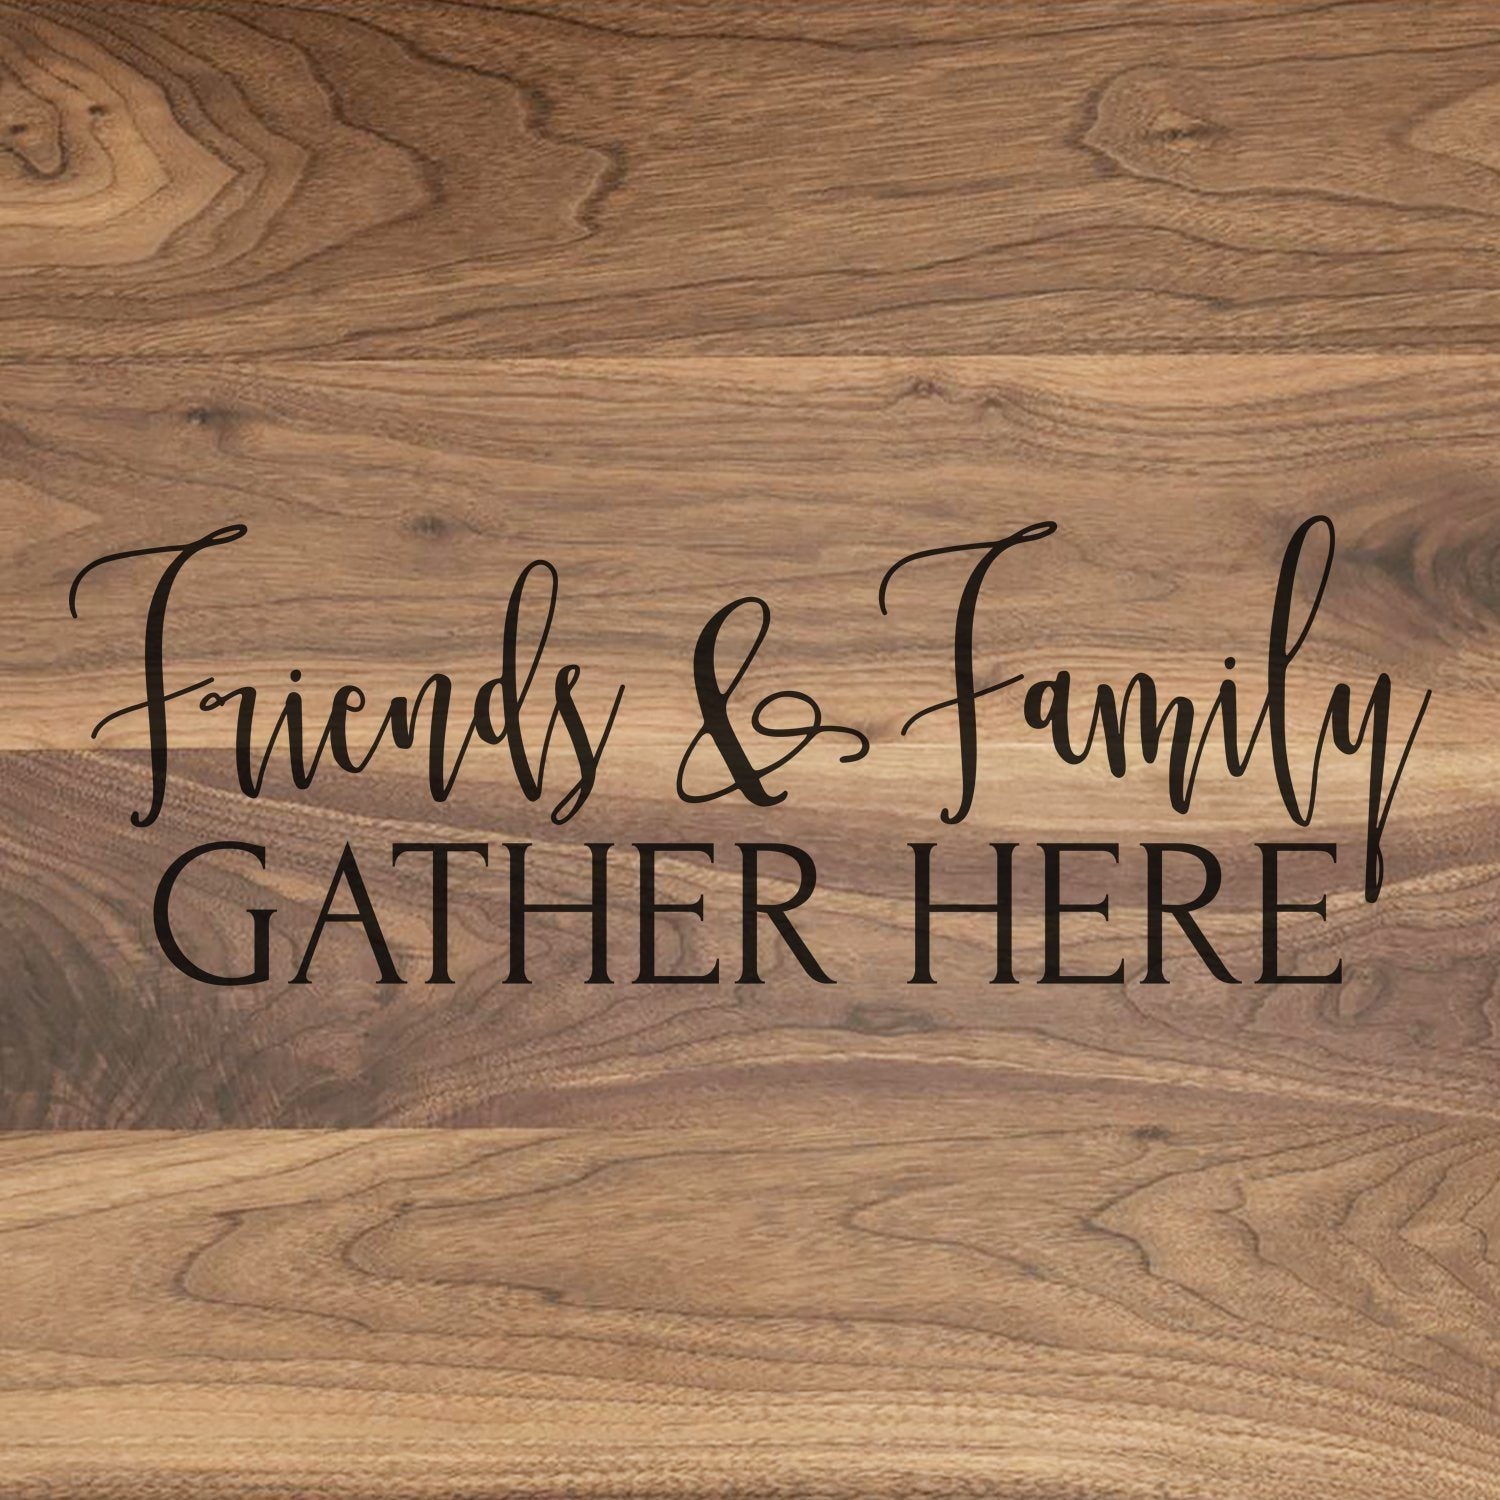 Camping Forecast - Engraved Walnut Cutting Board – Hailey Home